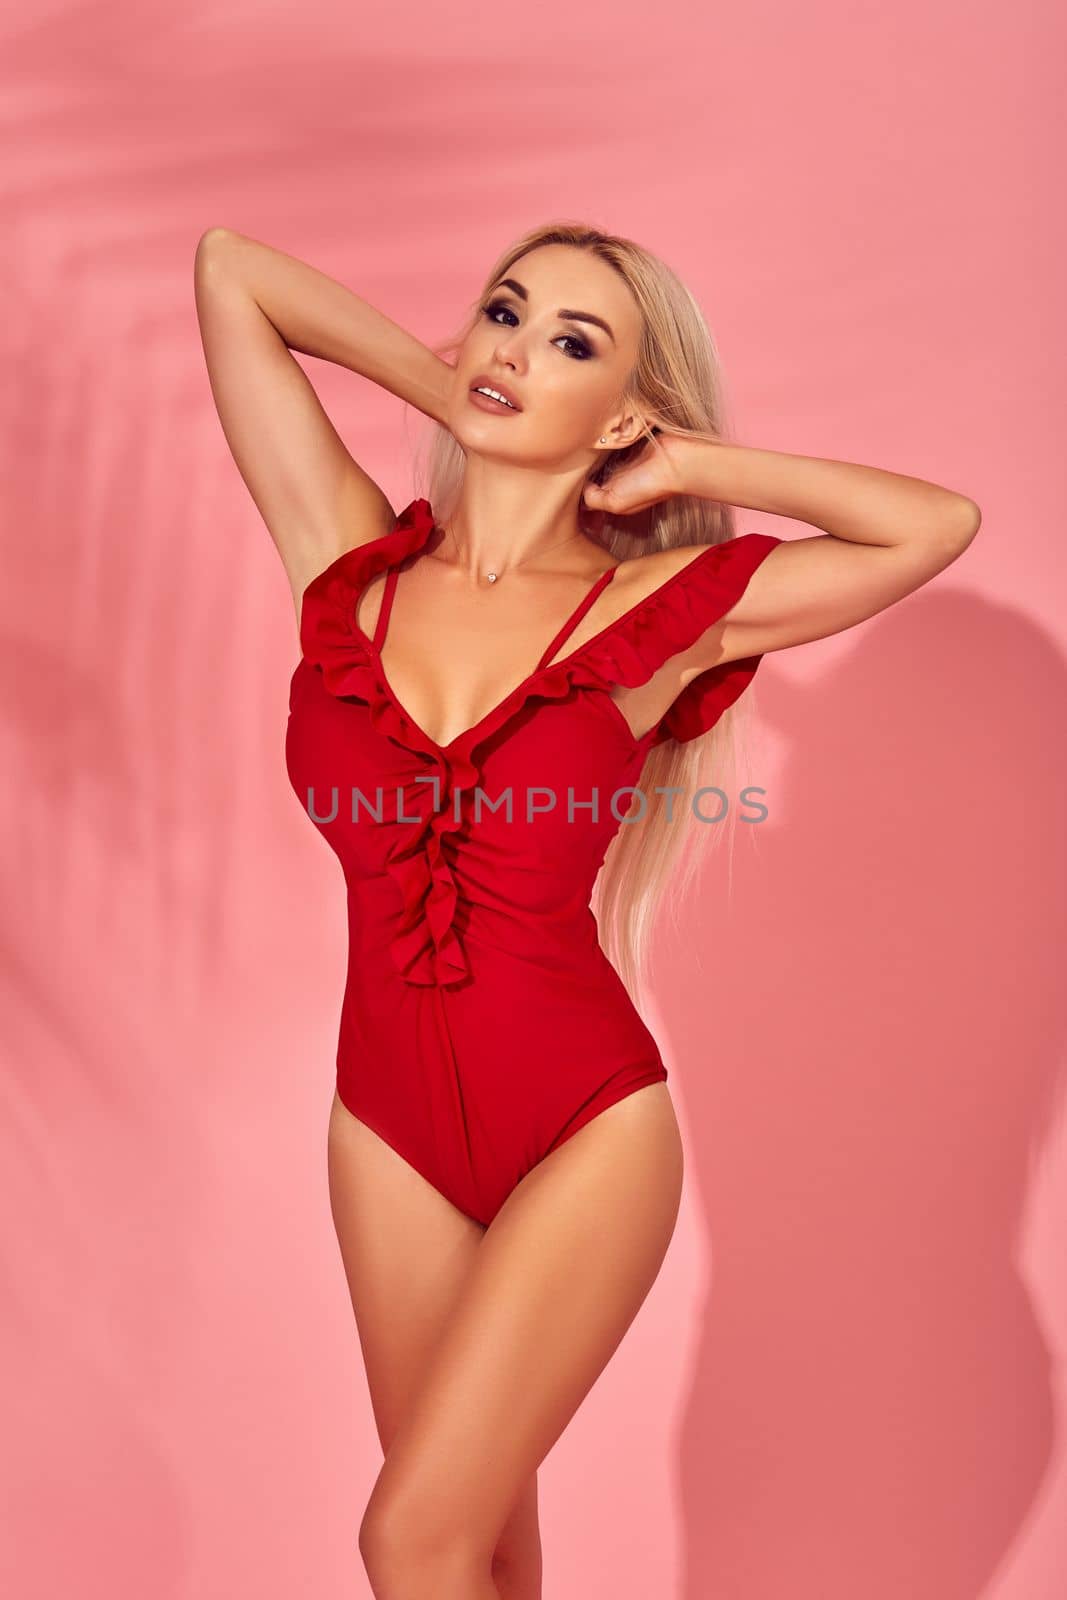 Stunning blonde female model with amazing body standing in an elegant red swimsuit on pink background with palm shadow. Vacation and recreation concept